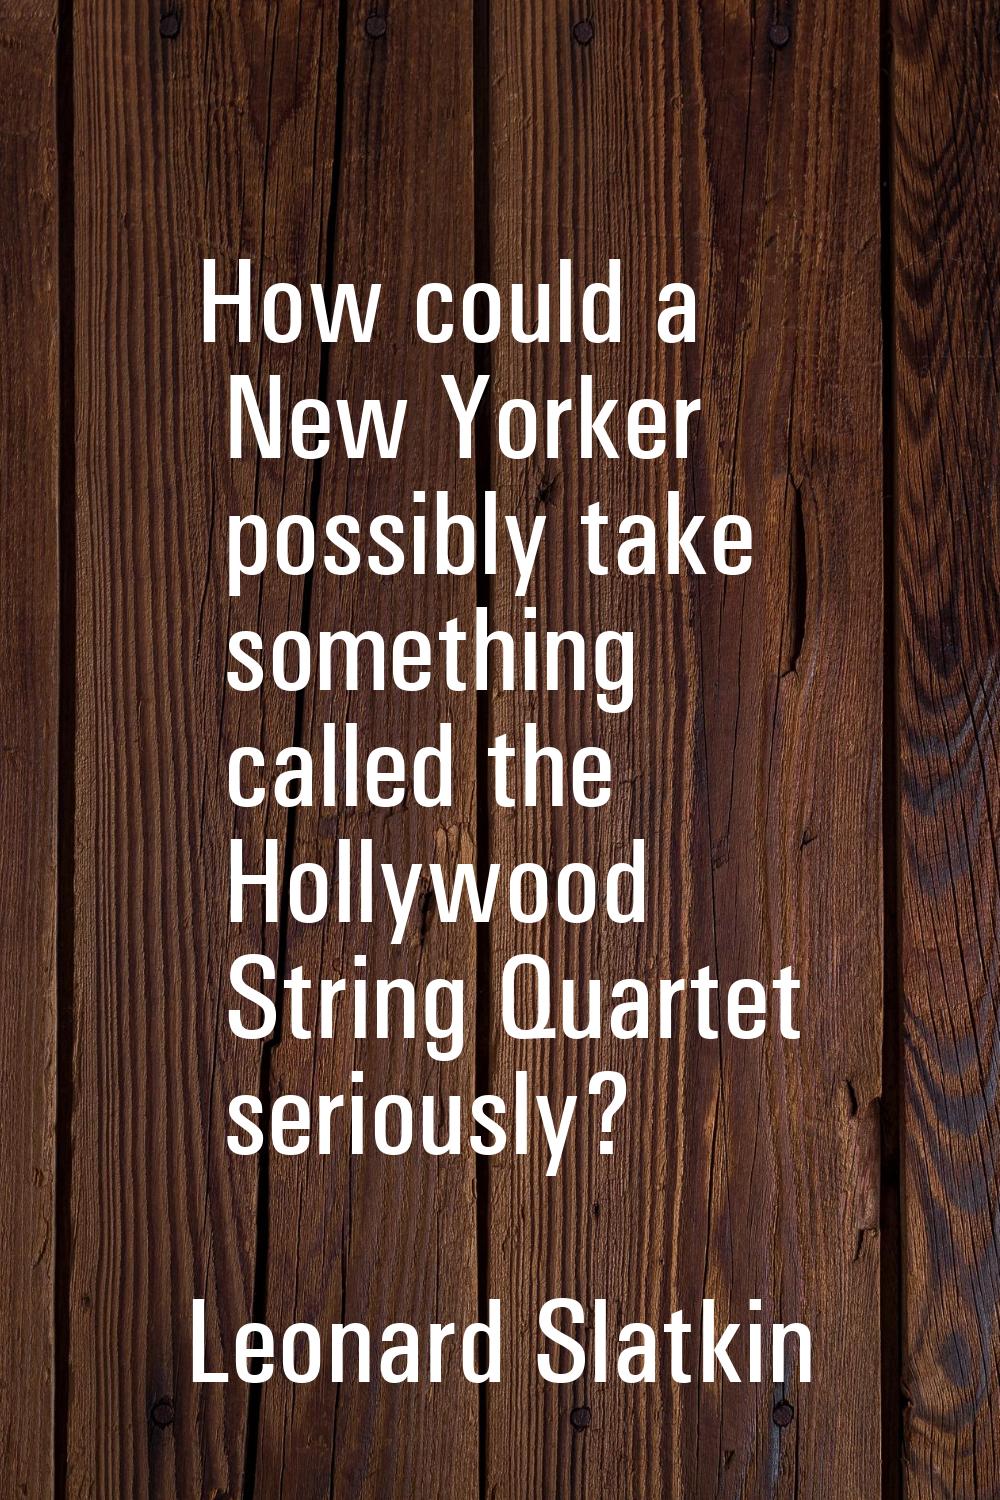 How could a New Yorker possibly take something called the Hollywood String Quartet seriously?